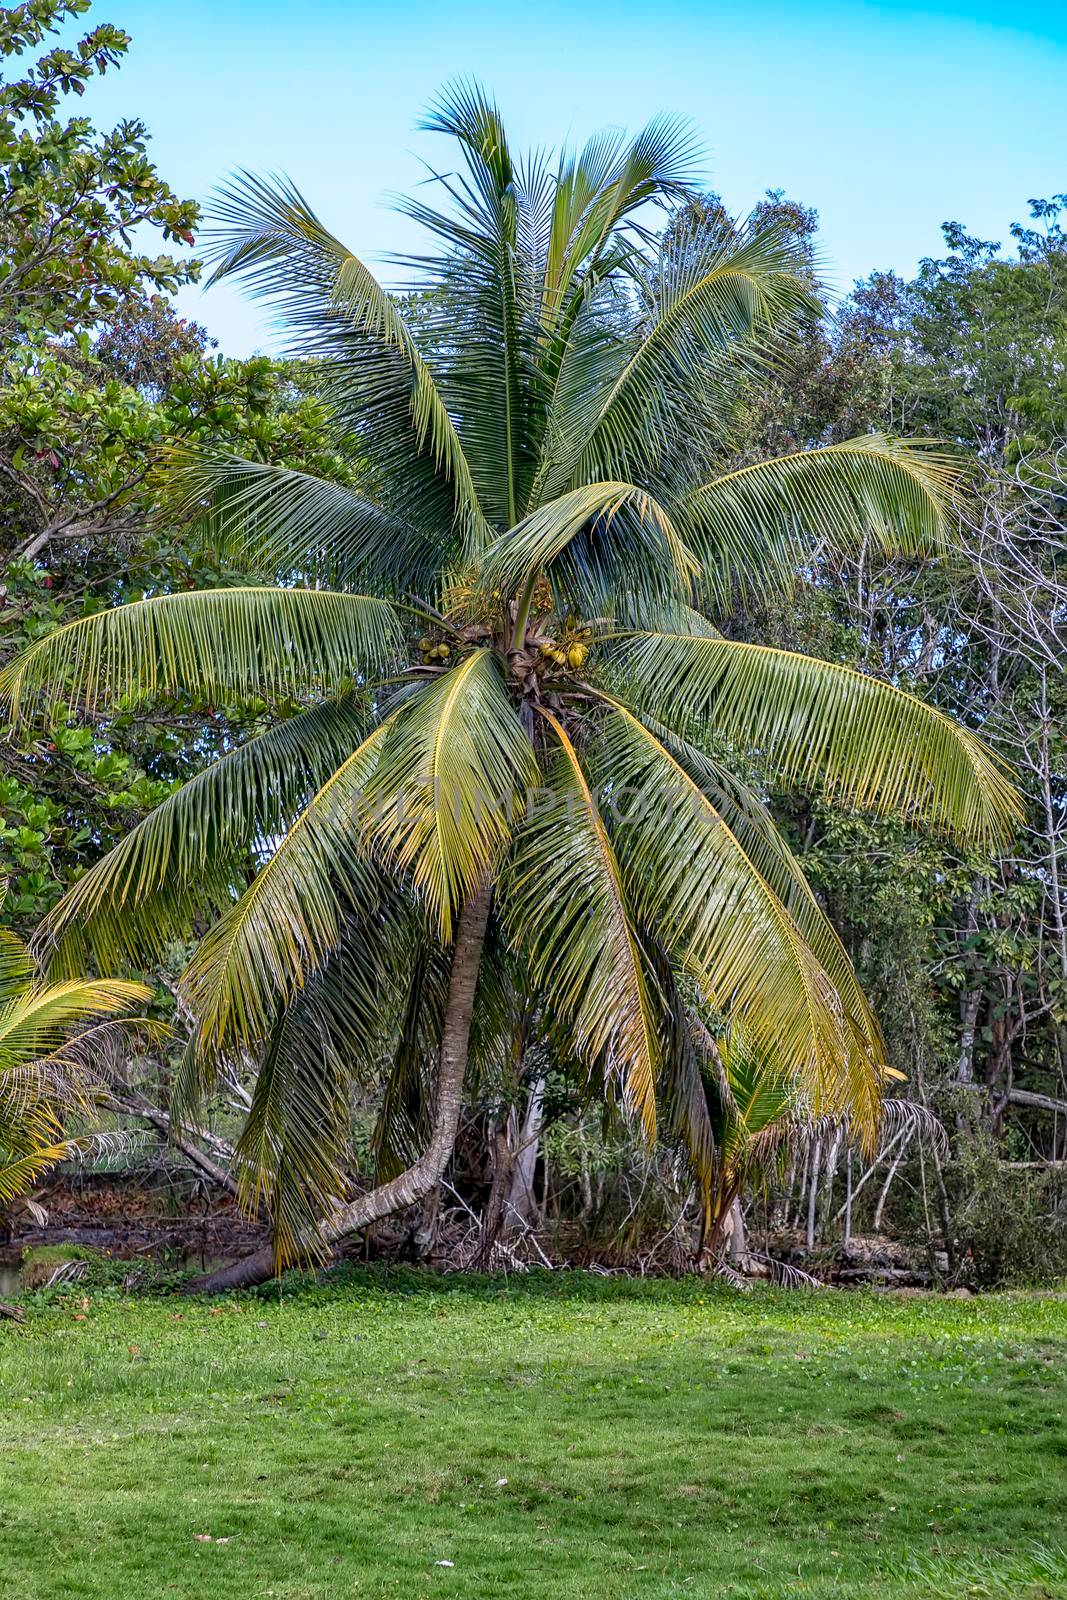 Coconut palm tree at a park in a tropical location. Vertical view